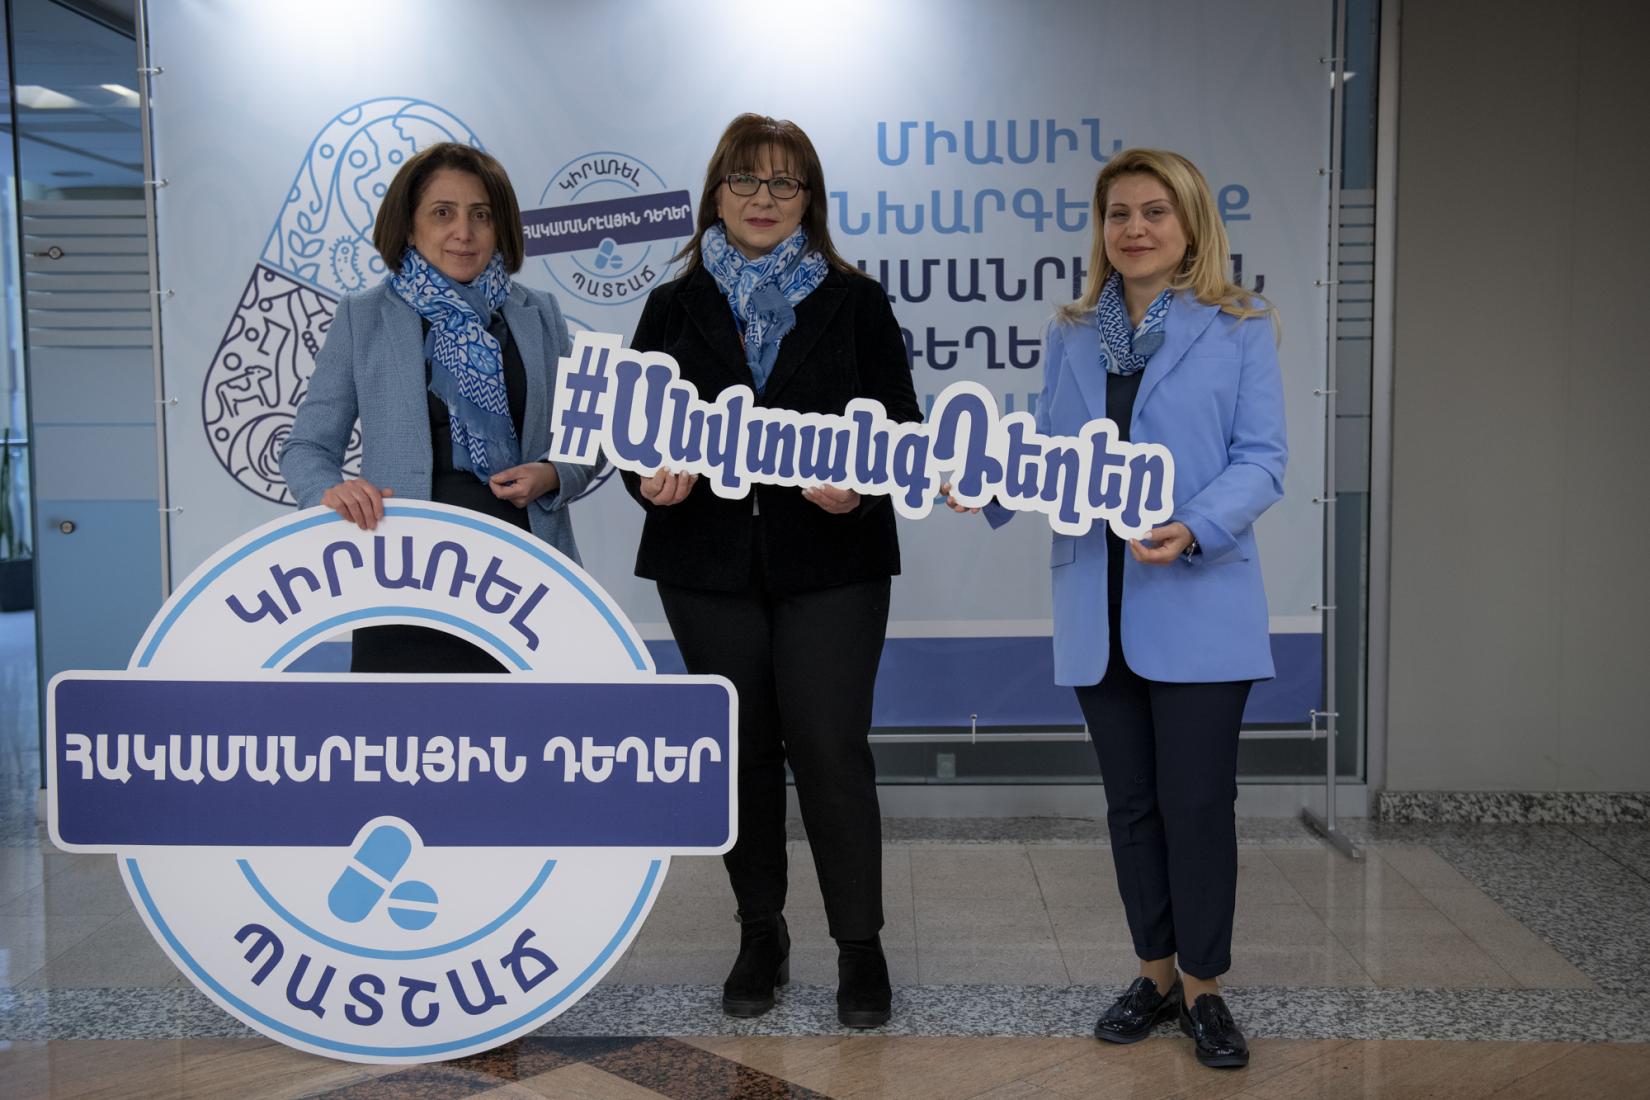 Three women holding a banner on the safe use of drugs.